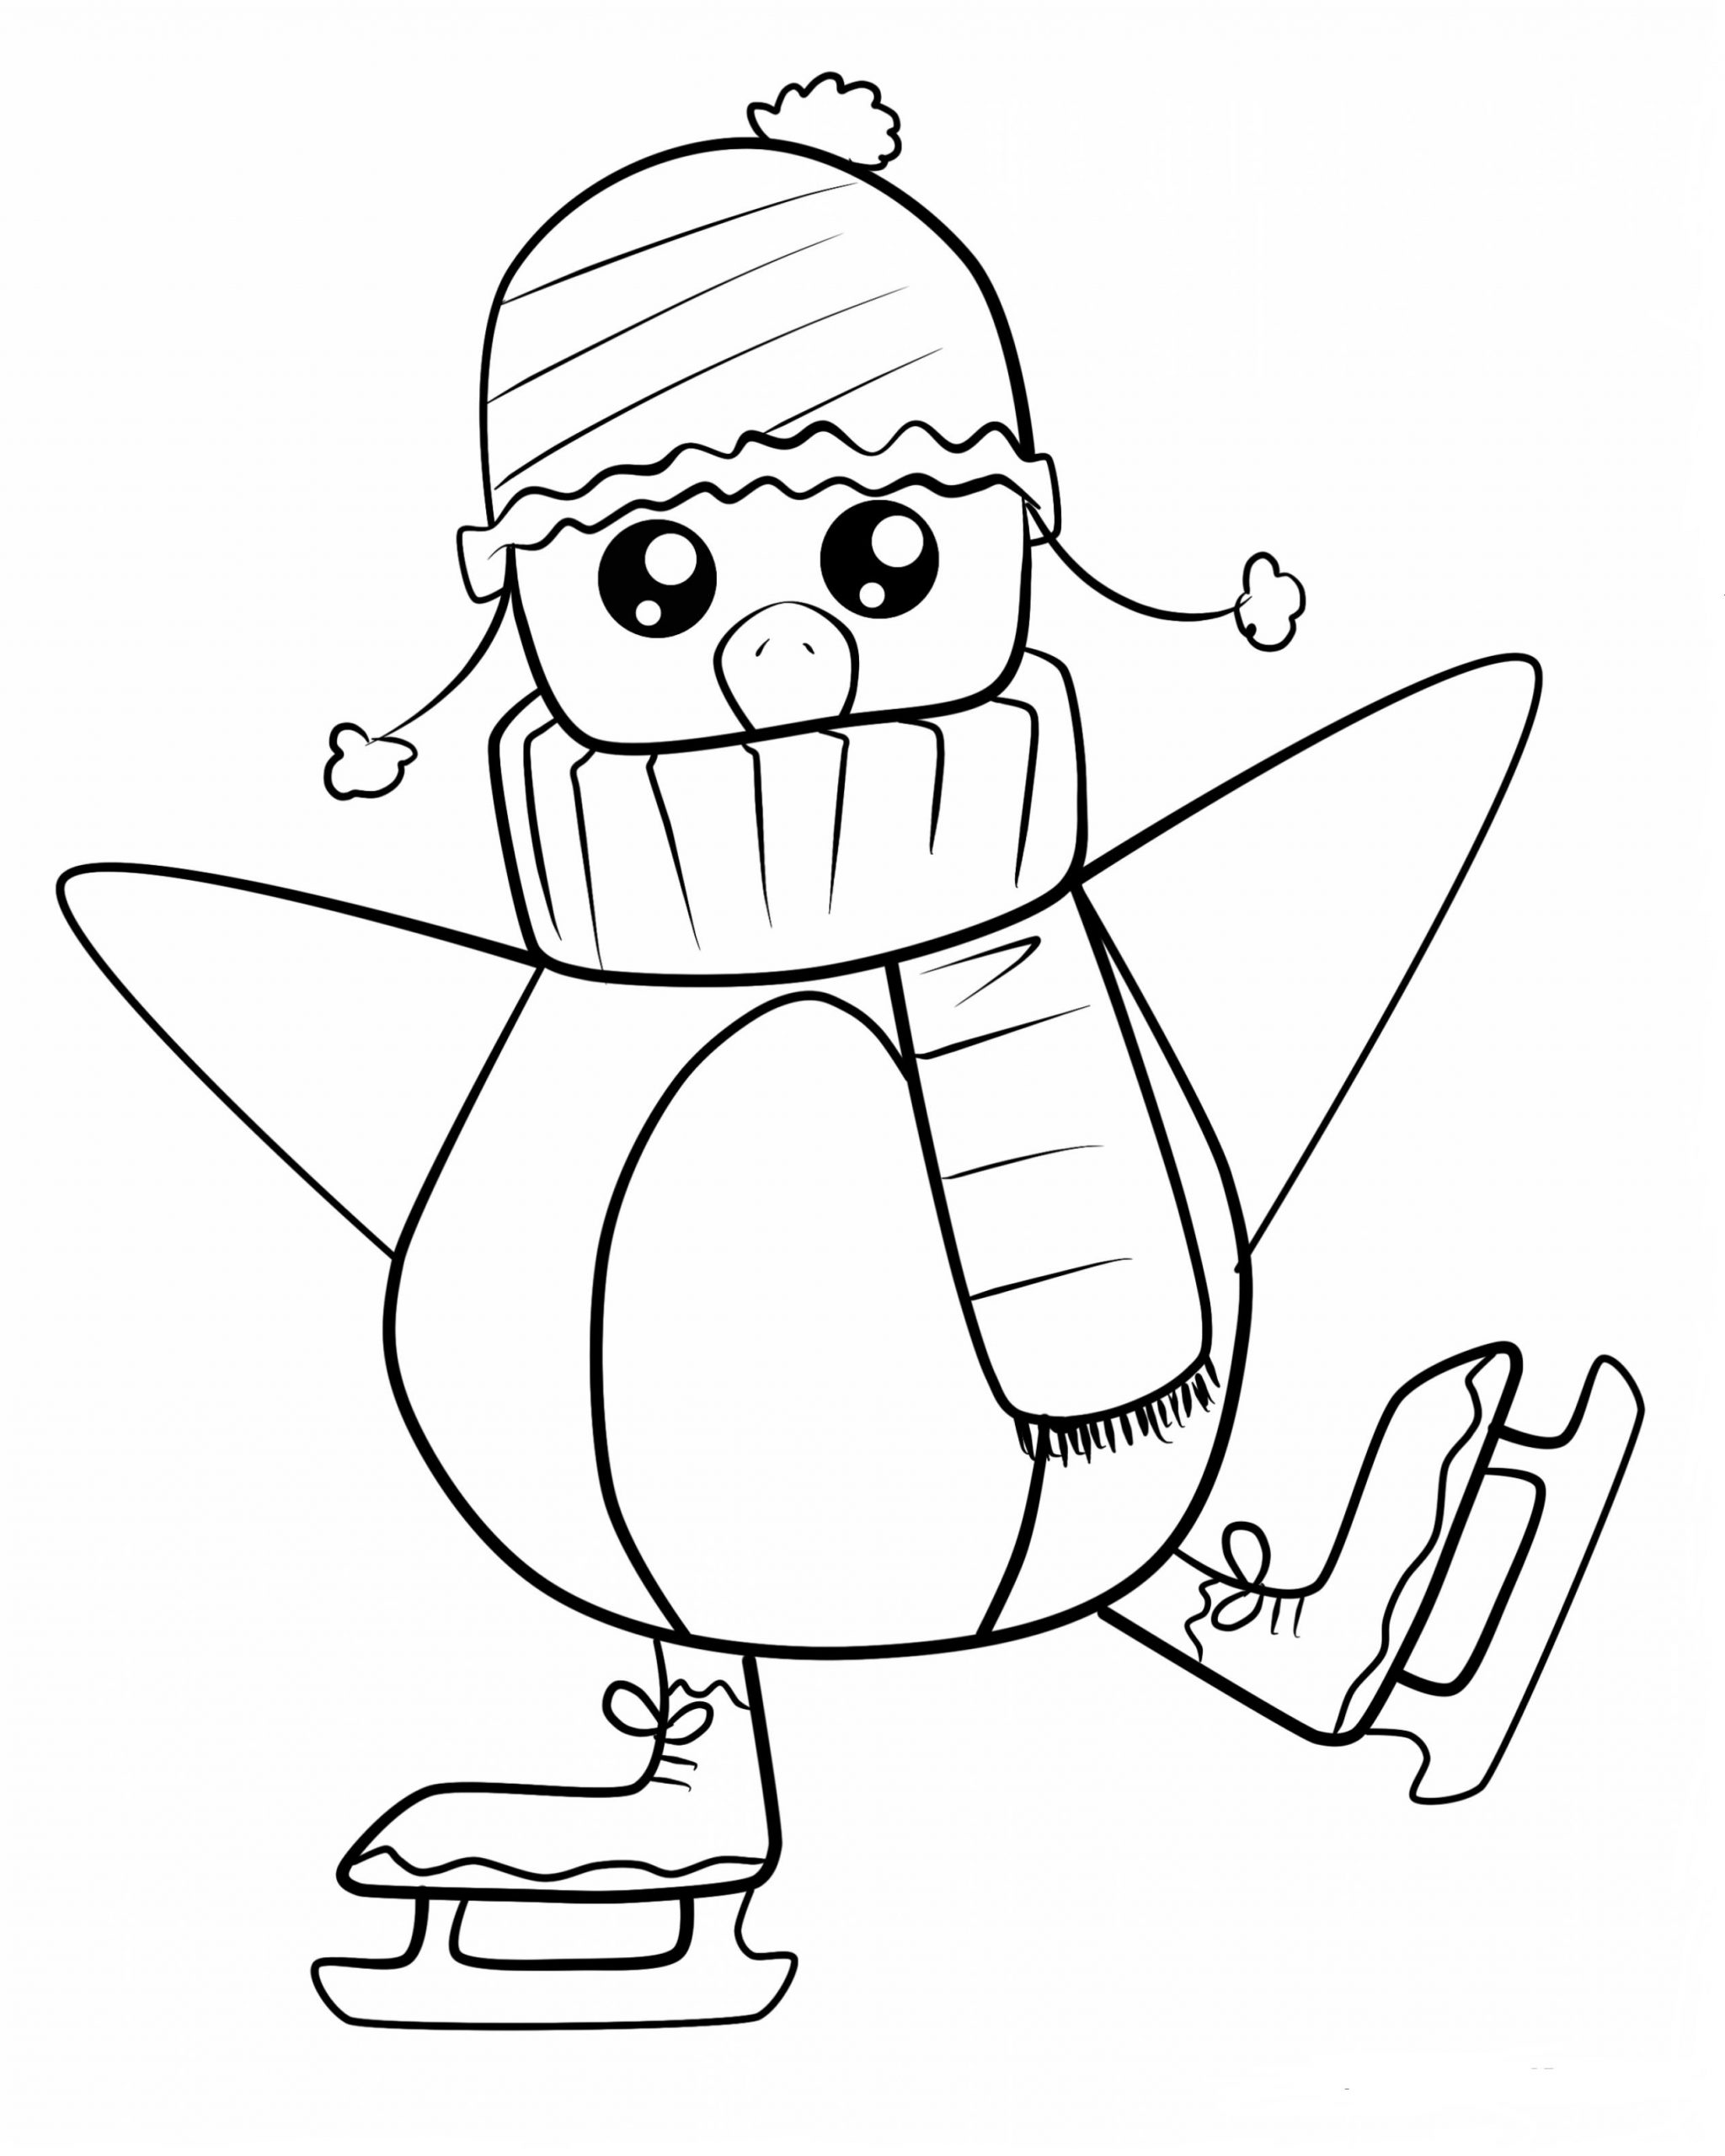 1544403022_picture-christmas-hunting-coloring-pages-4-perfect-ideas-cute-astonishing-penguin-page